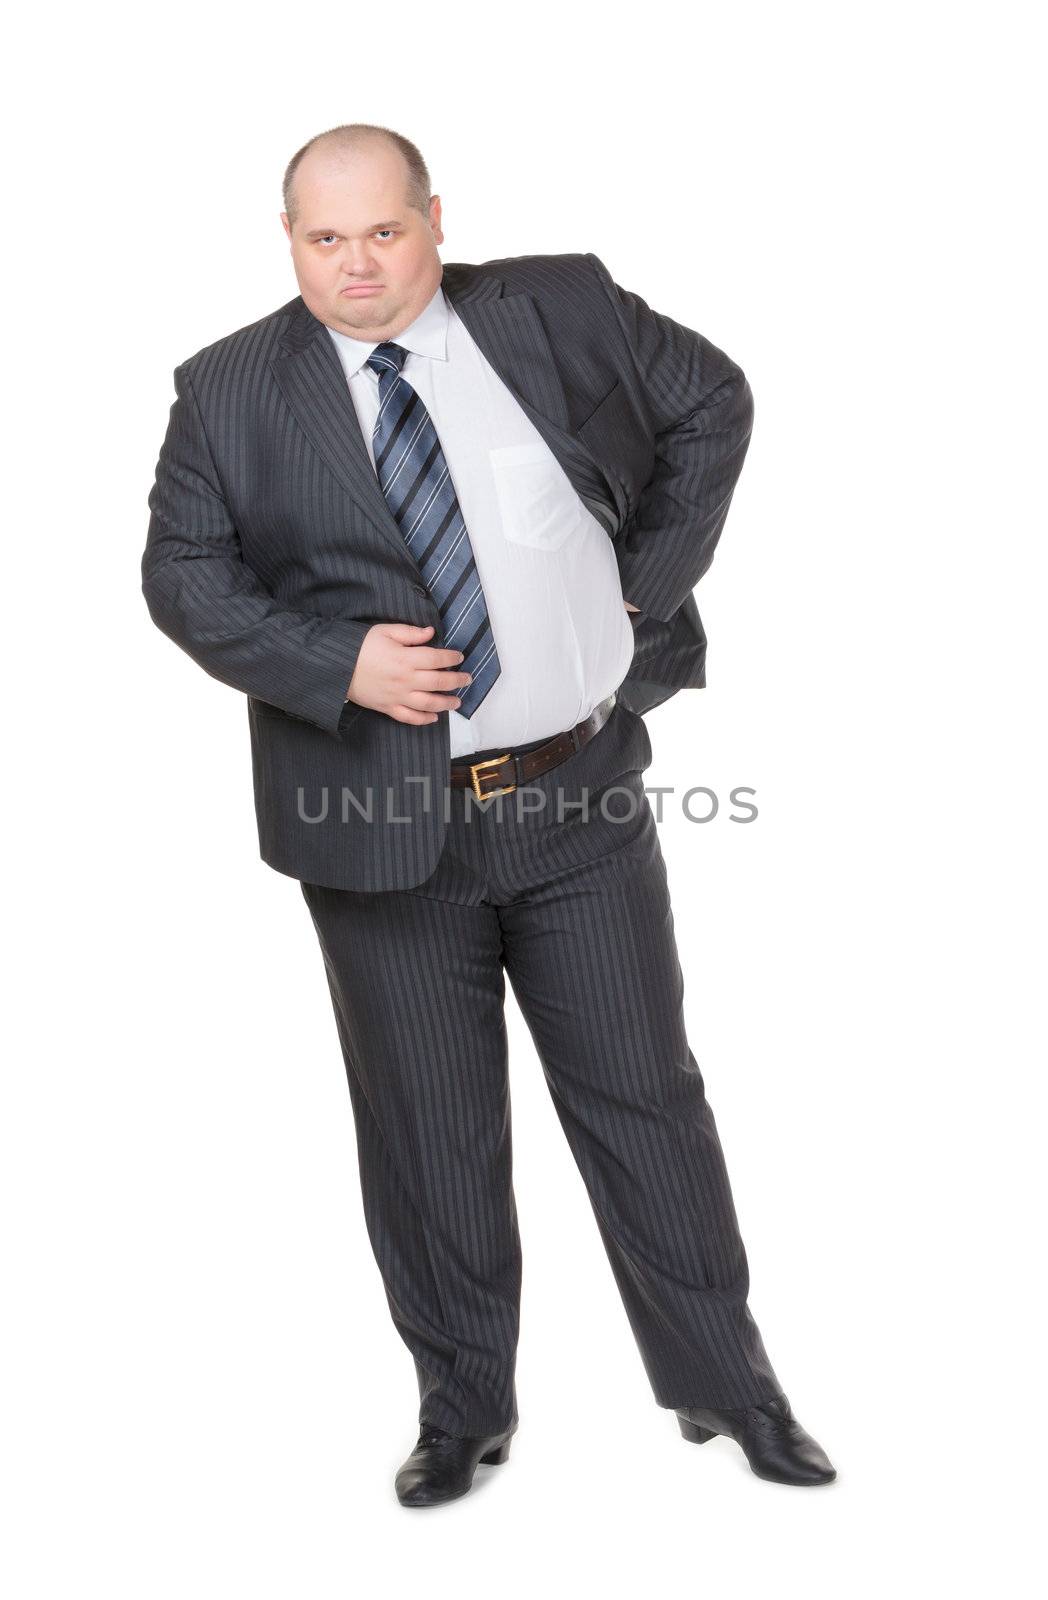 Fat overweight businessman in a stylish suit standing with his hand on his hip glowering at the camera with a displeased expression, studio portrait on white